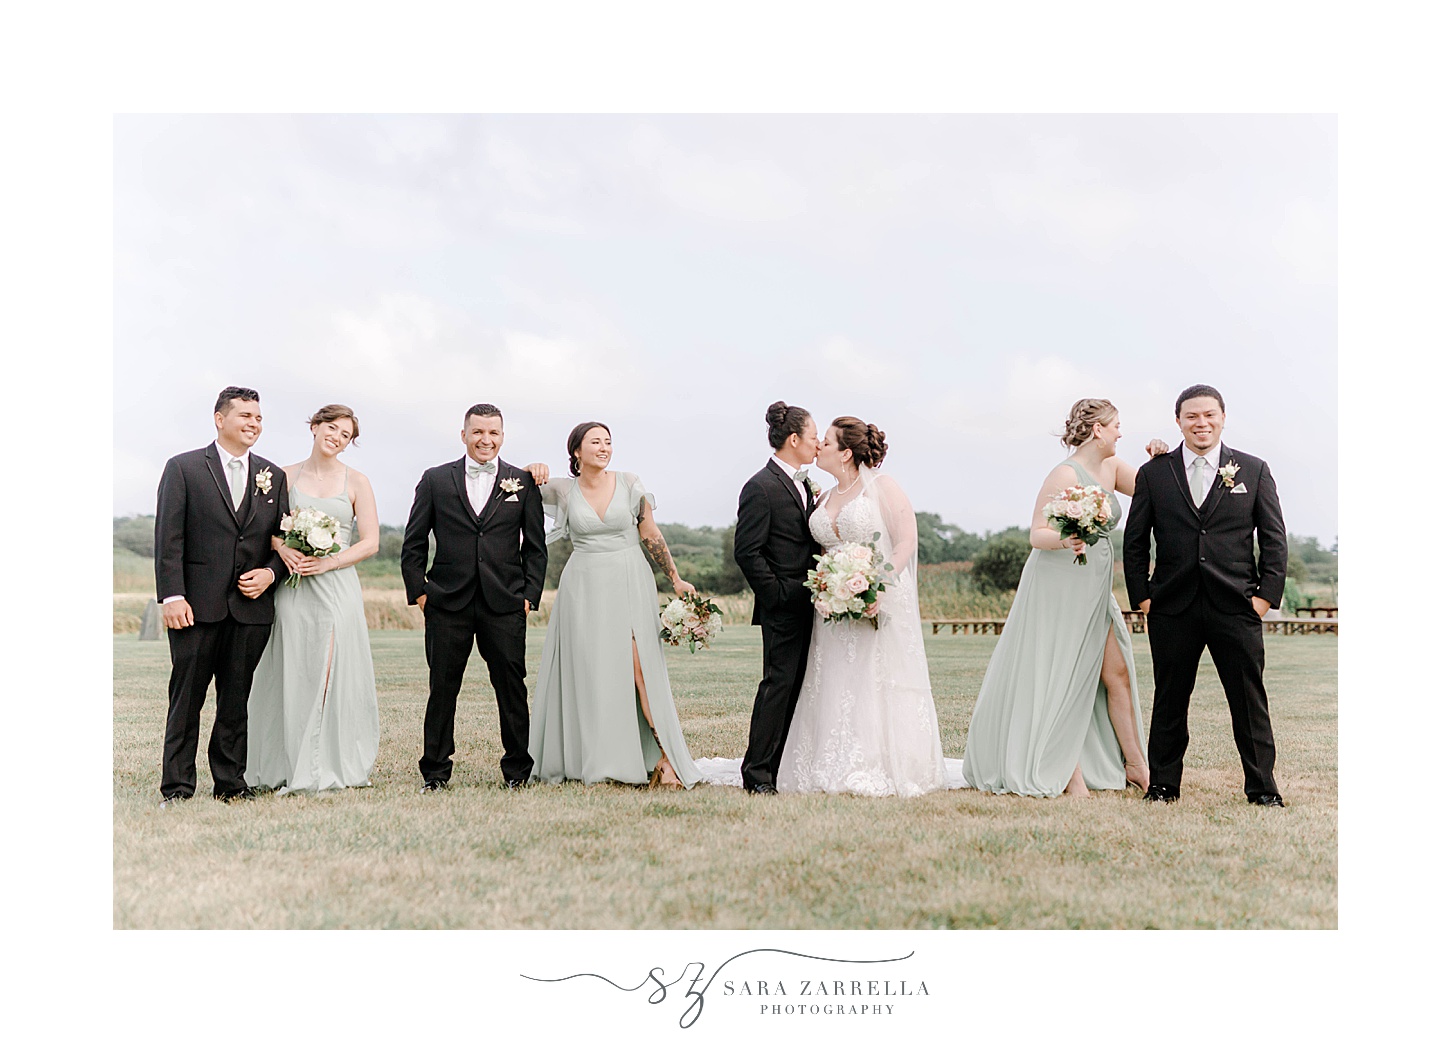 bride and groom kiss with wedding party around them